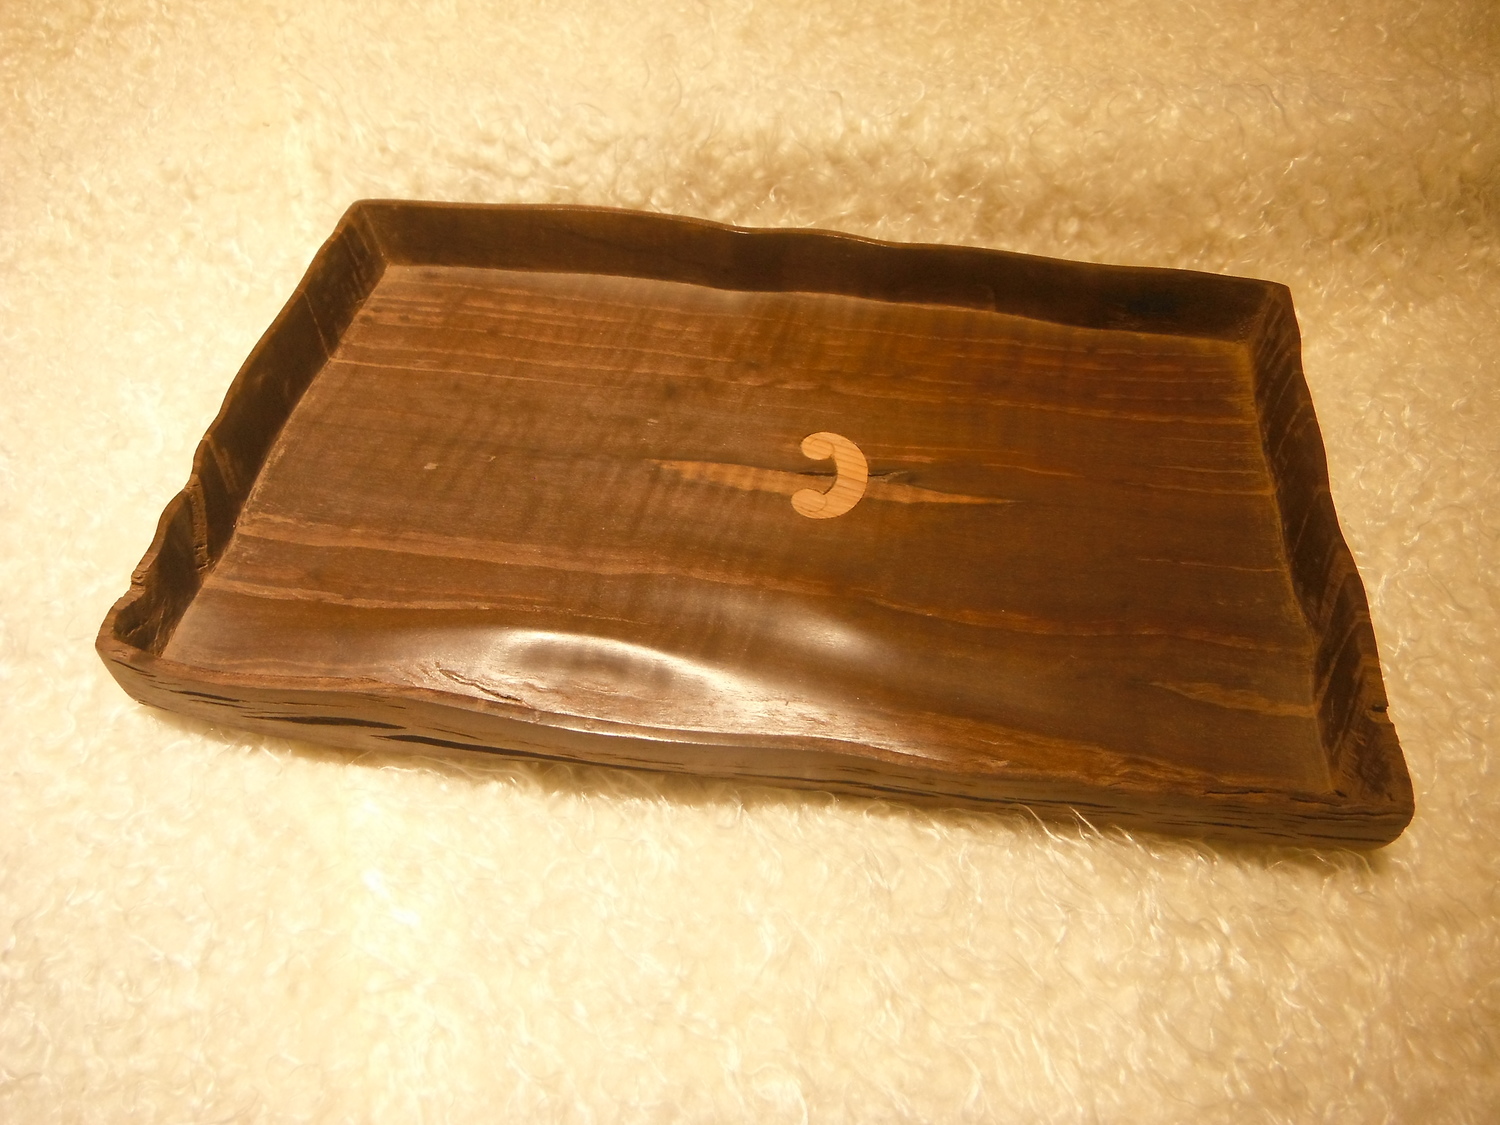 Liaochun Hand-Carved Wooden Tray